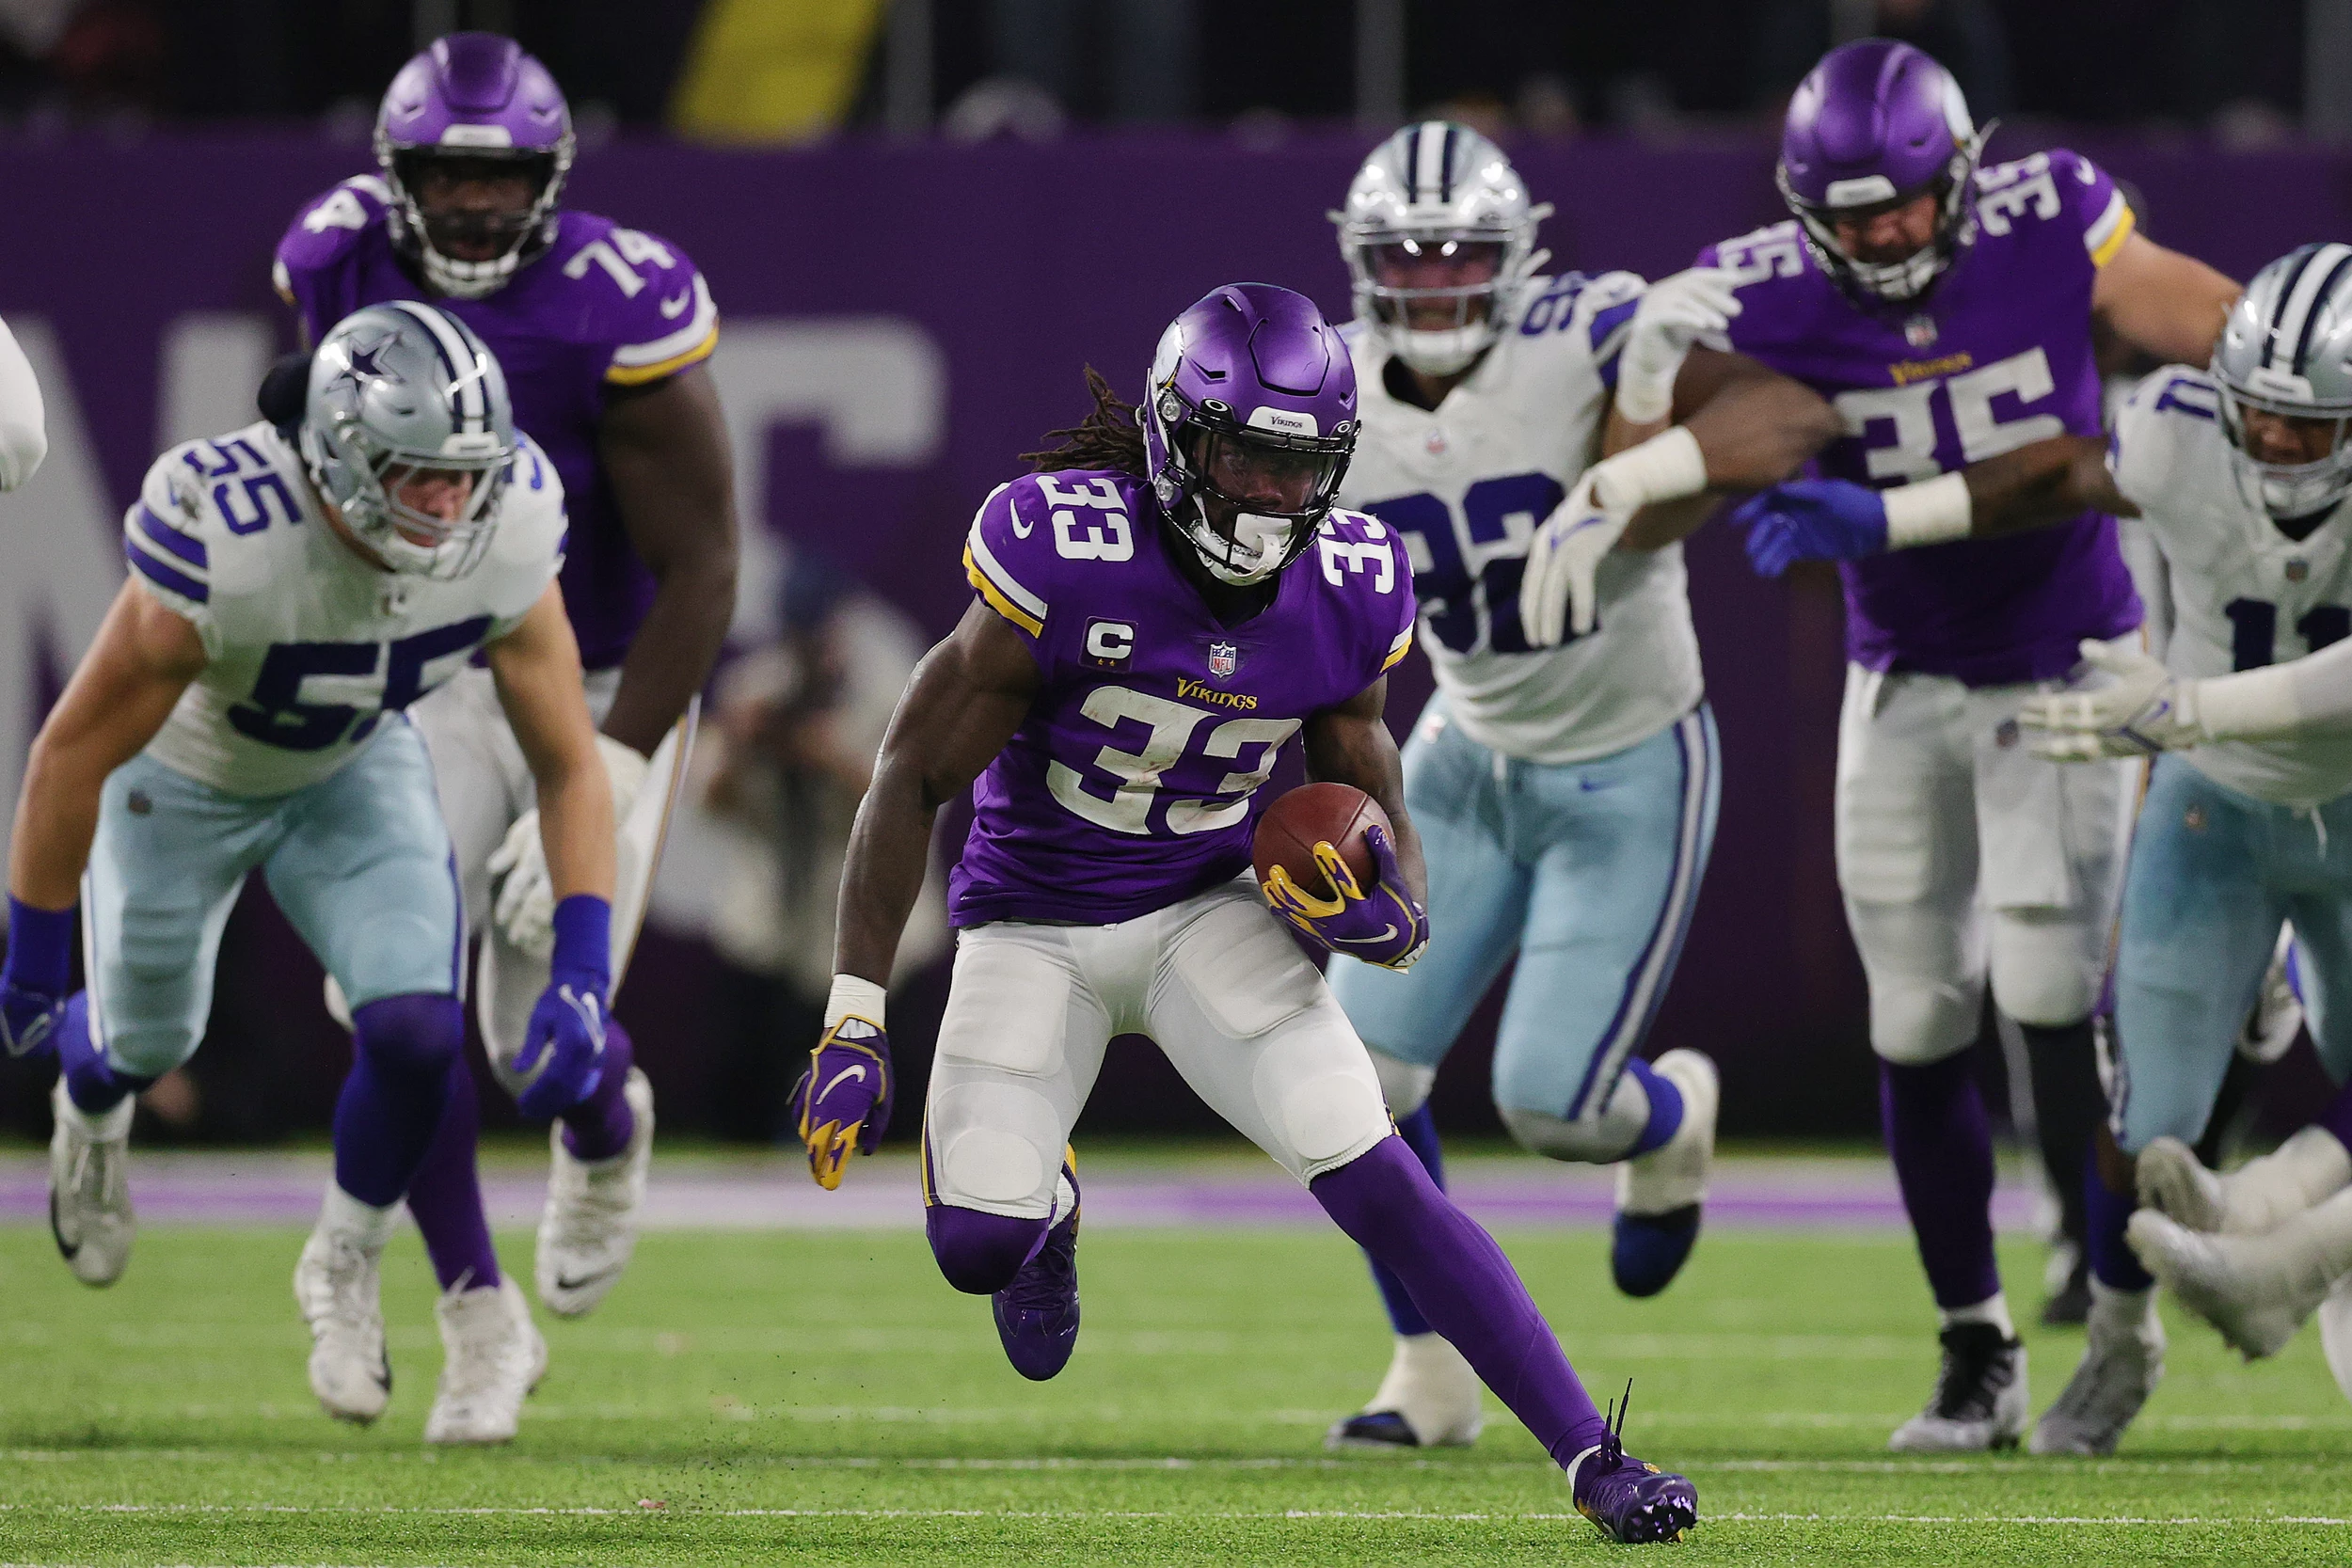 Vikings-Giants game on Dec. 27 moved to 7:30 p.m. start